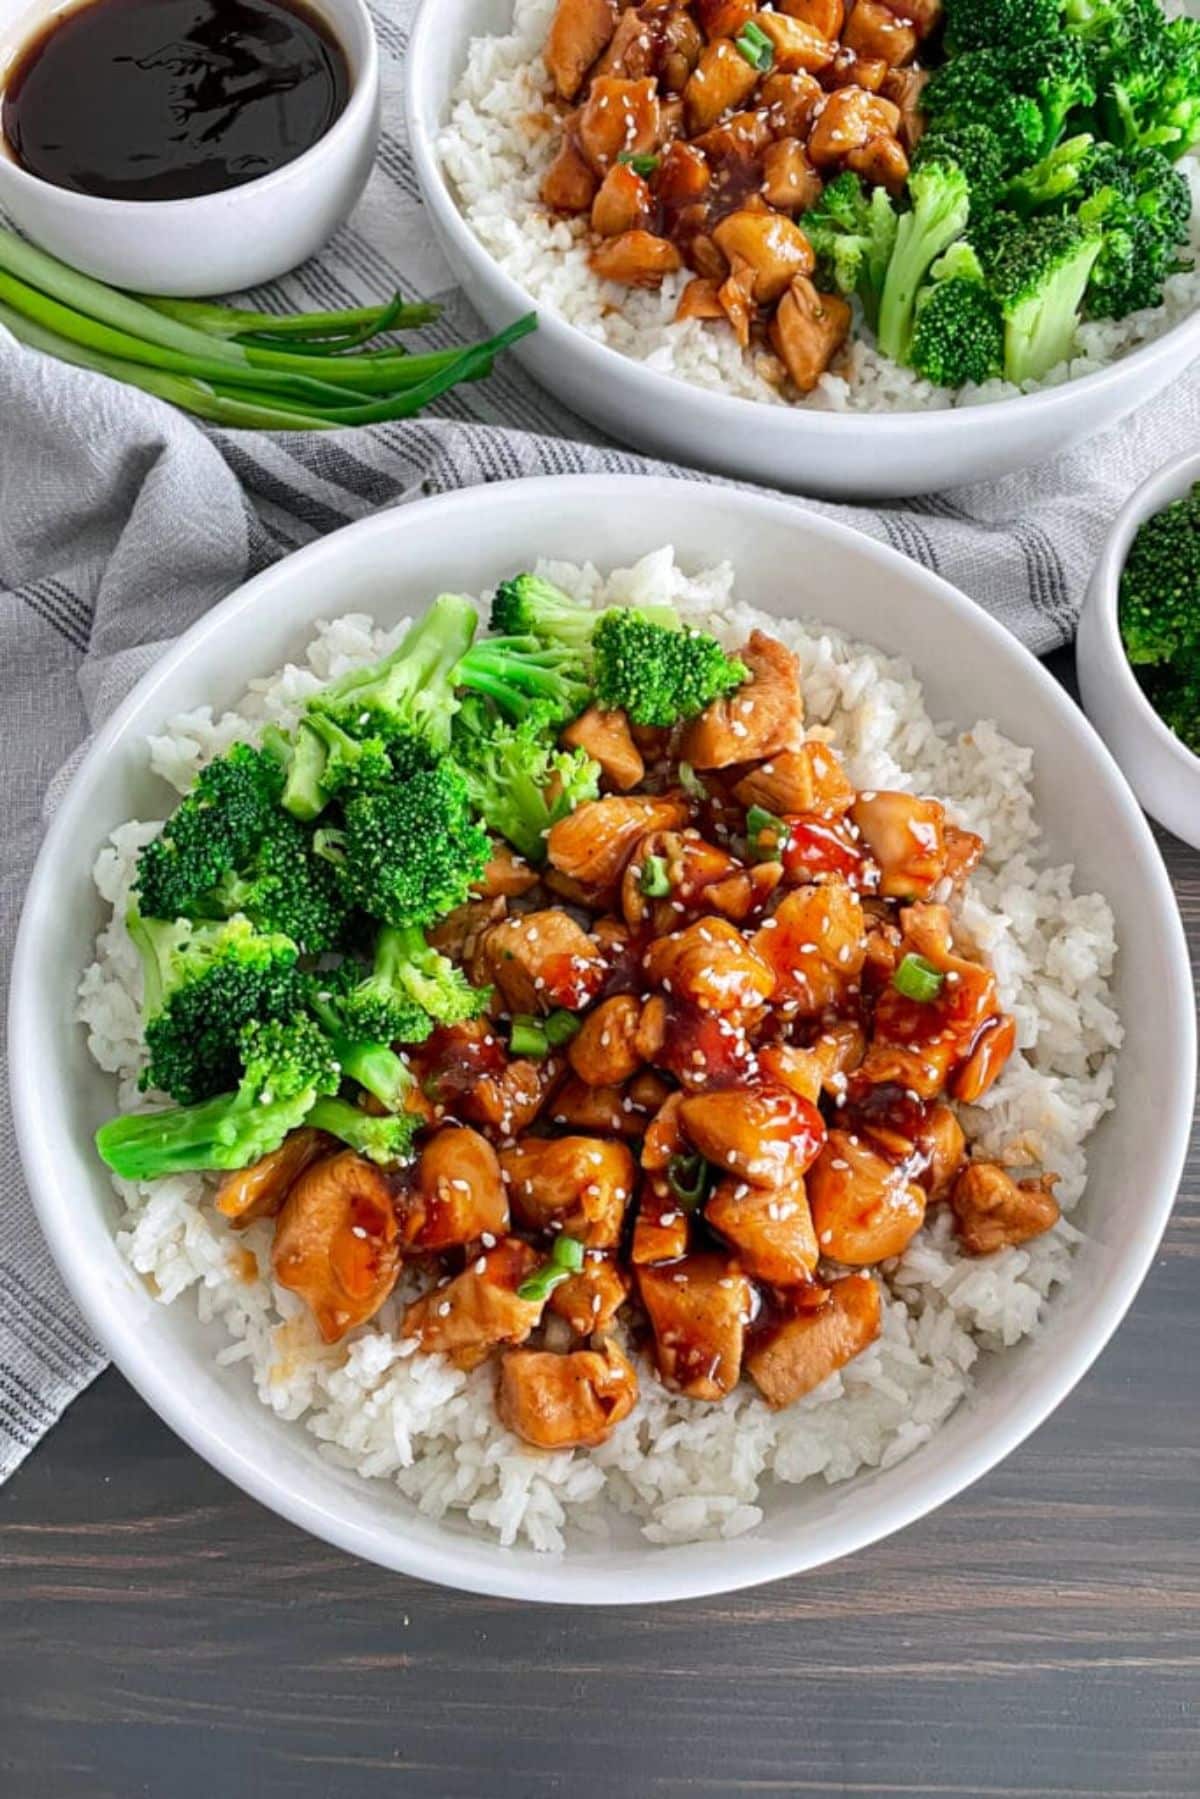 Teriyaki Chicken Bowls on a wooden table.